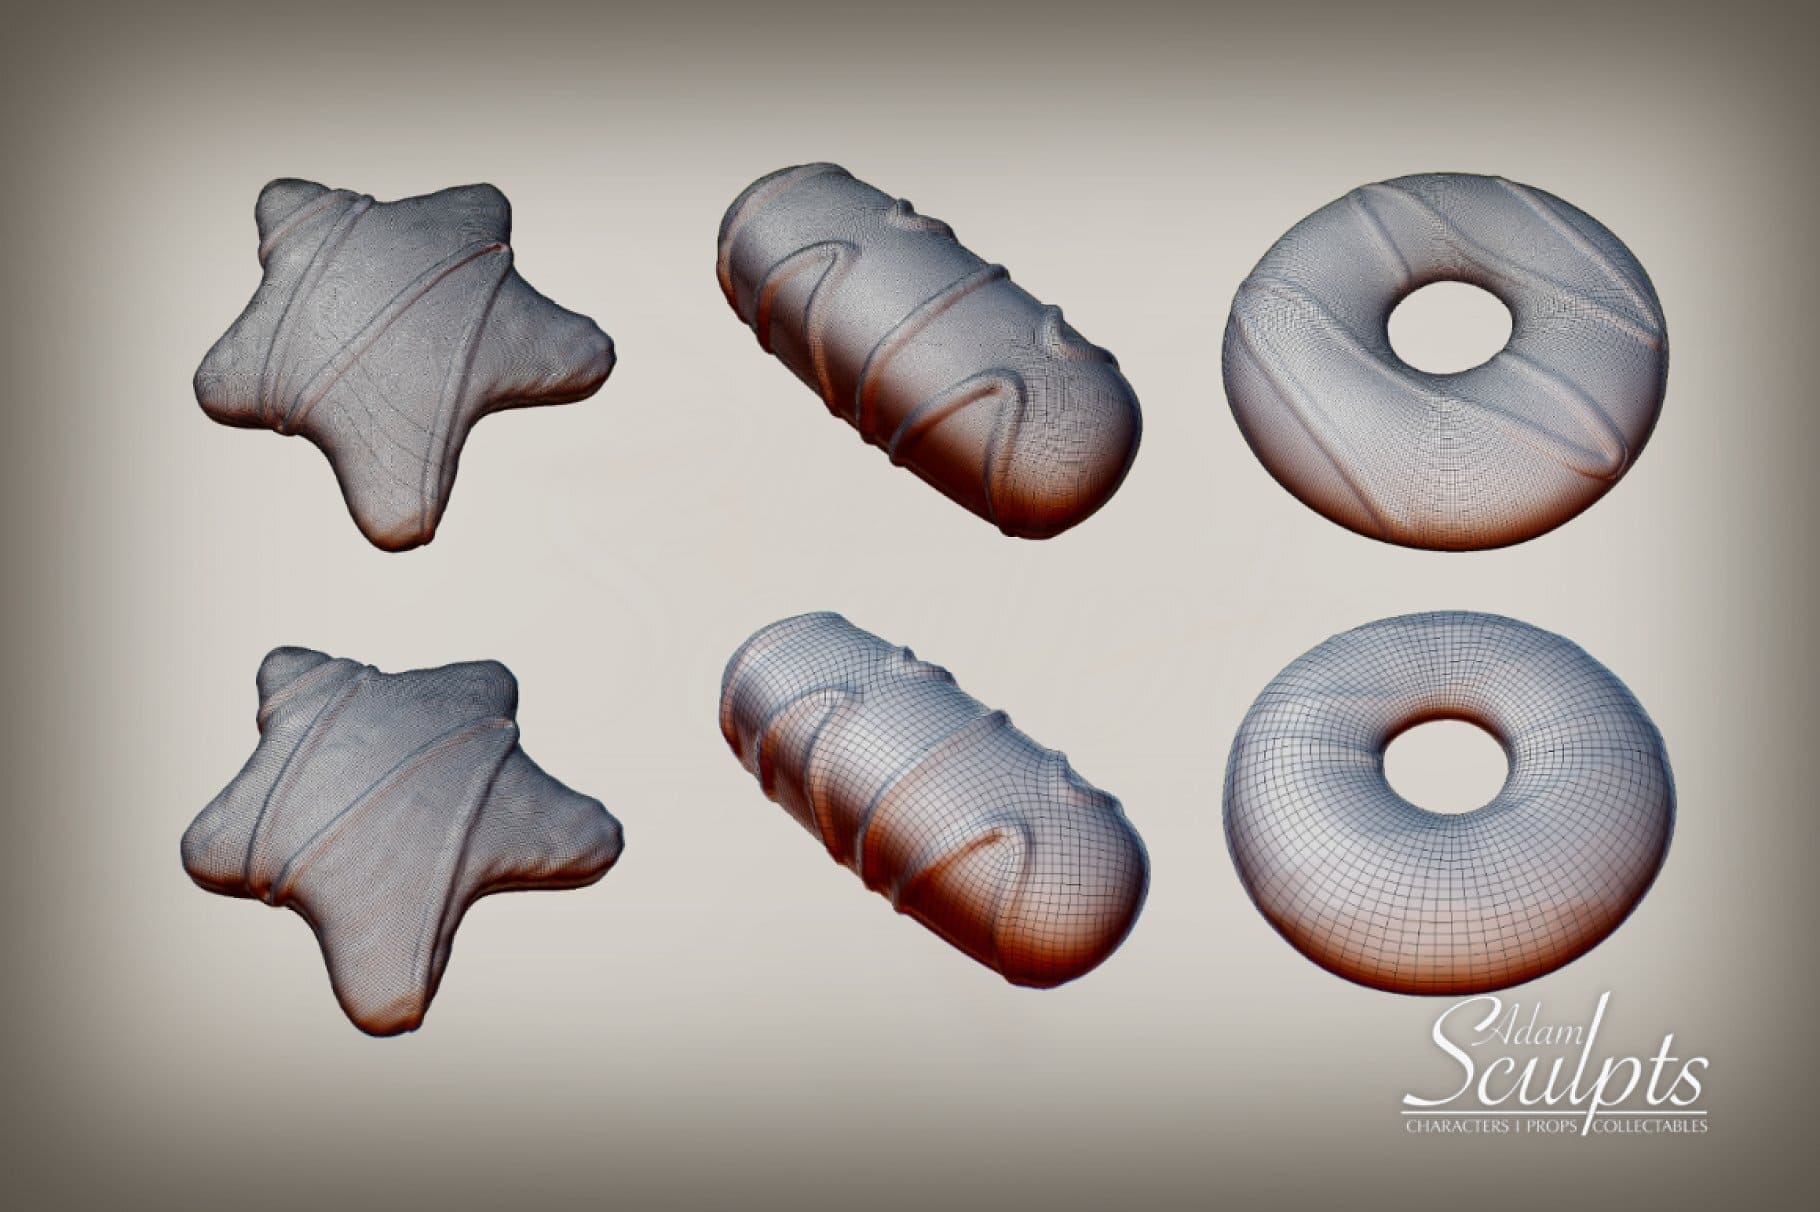 3D model of cookies in the form of a bar, star and bagel.